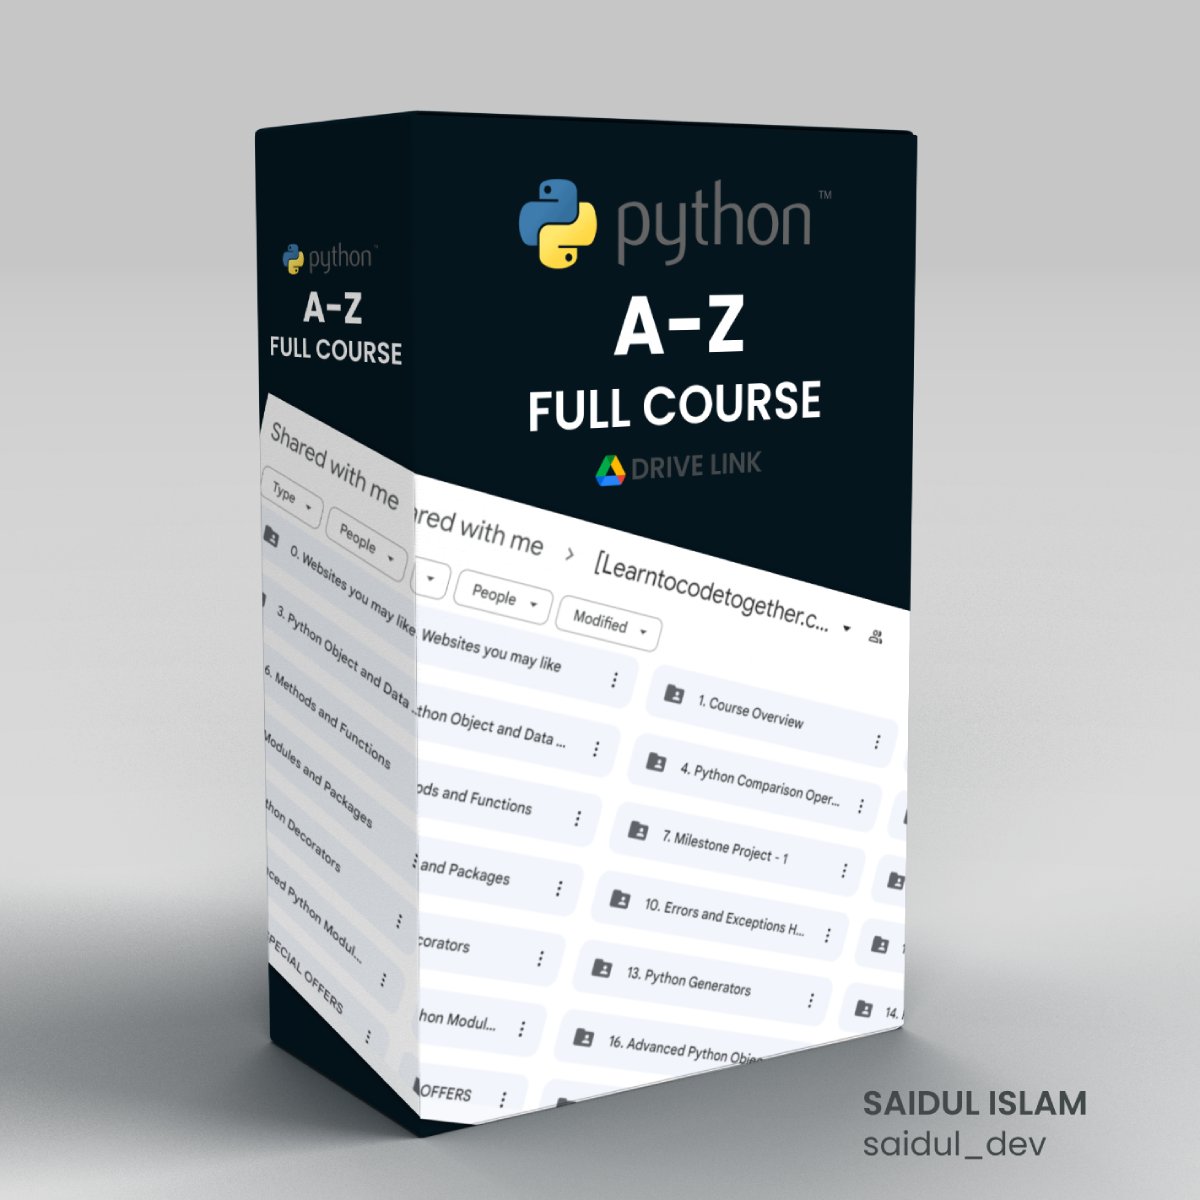 Python is a high-level programming language, but not easy to learn. To help you, I've created a comprehensive A to Z Full Course. Grab yours in : (Google Drive) Normally $150, but now FREE! To get: → Like, & Retweet → Reply 'course' → Follow me @saidul_dev for DM.